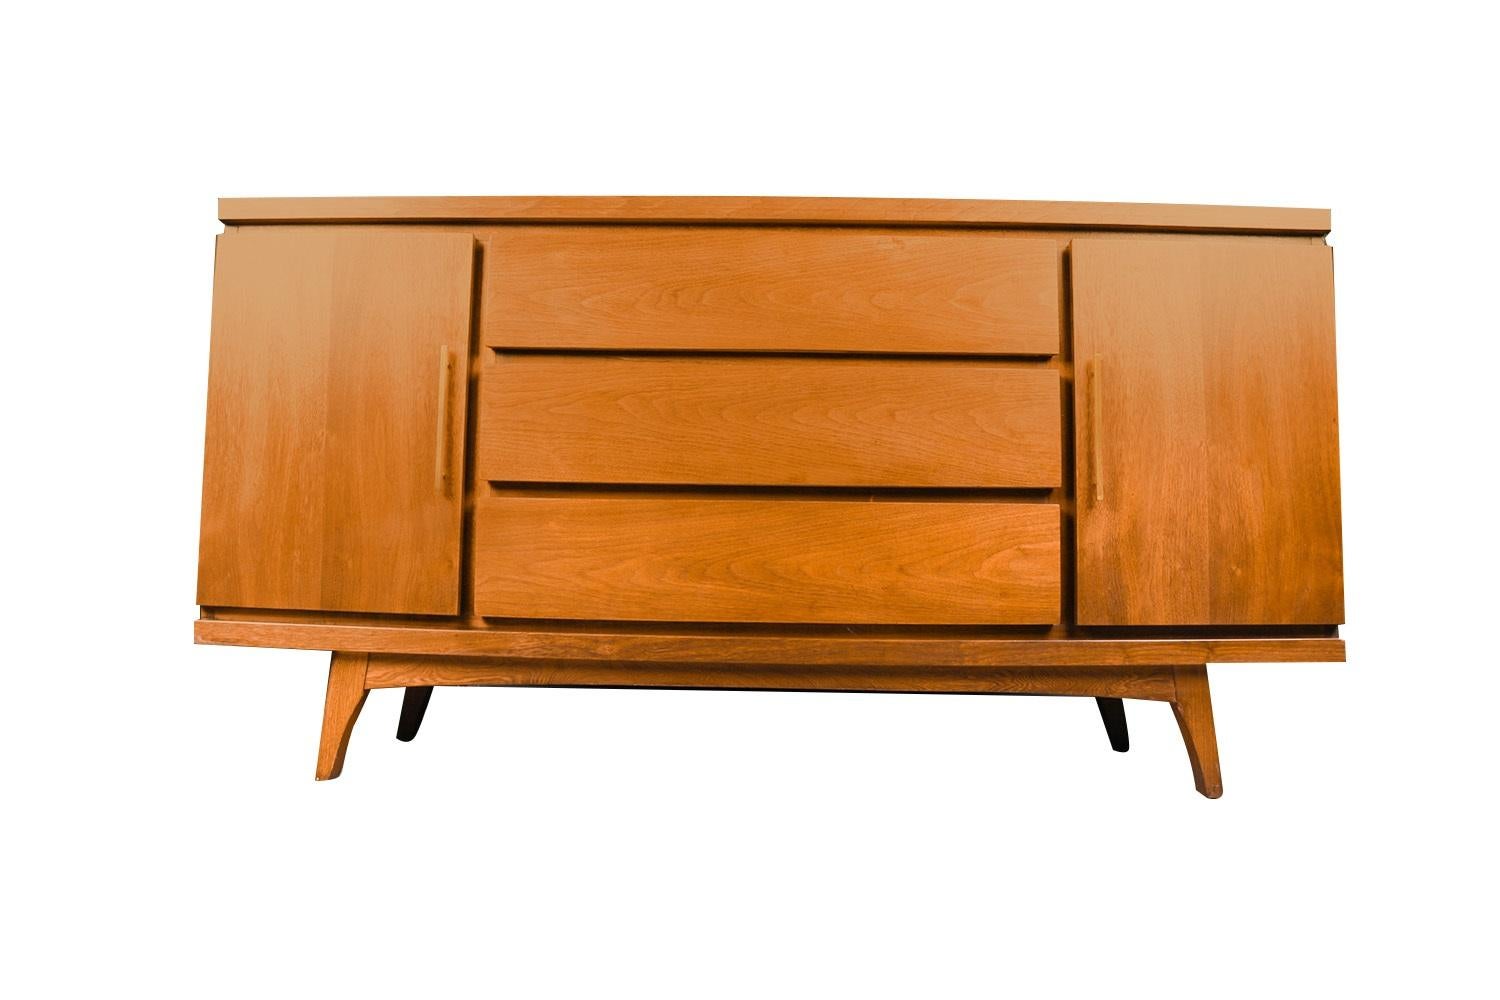 An exceedingly well-crafted credenza / dresser. Features the mid-century style and construction quality that keep these pieces in such high demand today. Beautiful all original walnut figuring and color. Unique design with wonderful clean lines